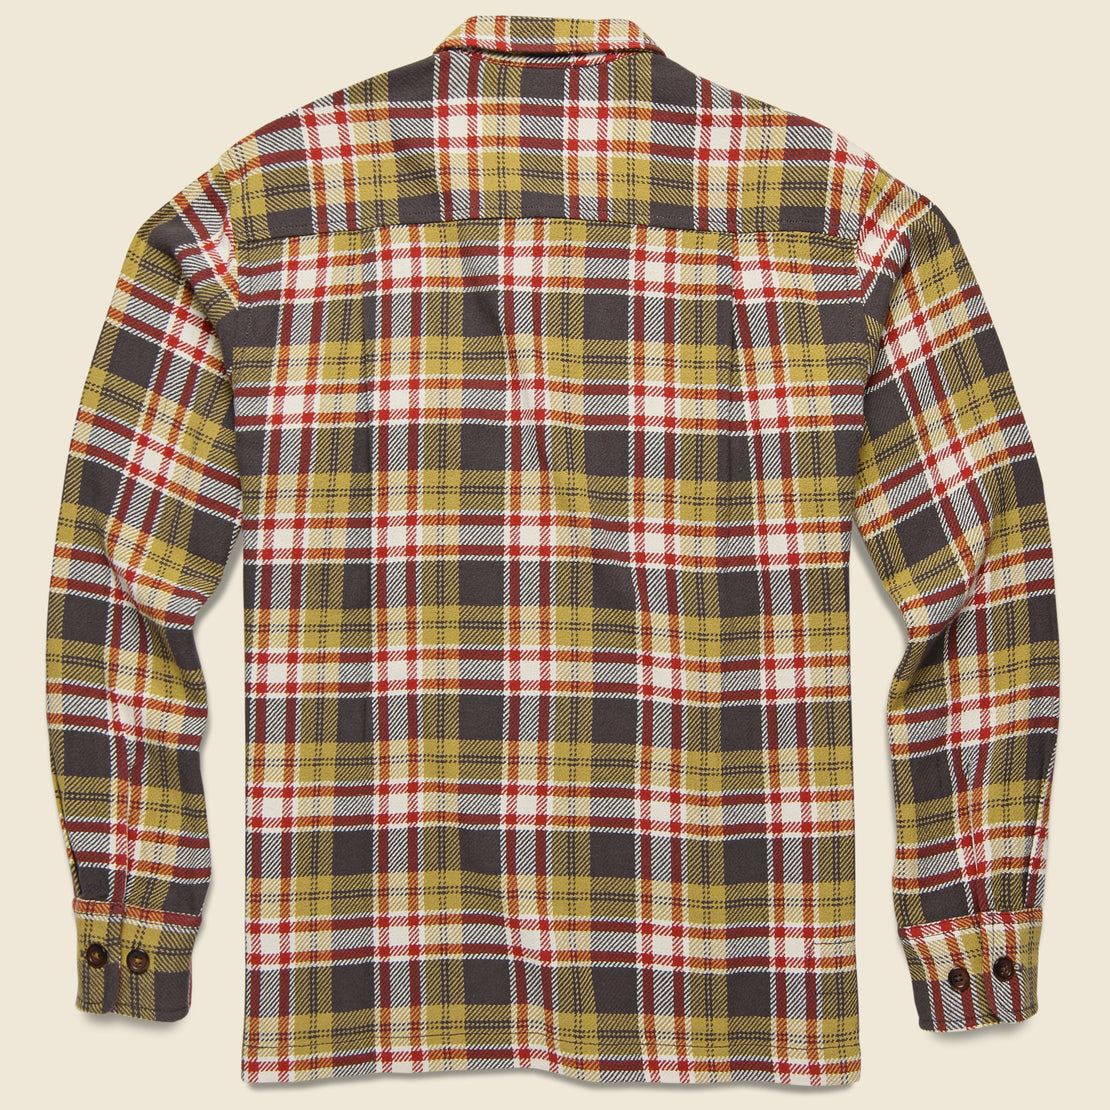 Utility Shirt - Sand/Red Check - Universal Works - STAG Provisions - Tops - L/S Woven - Plaid